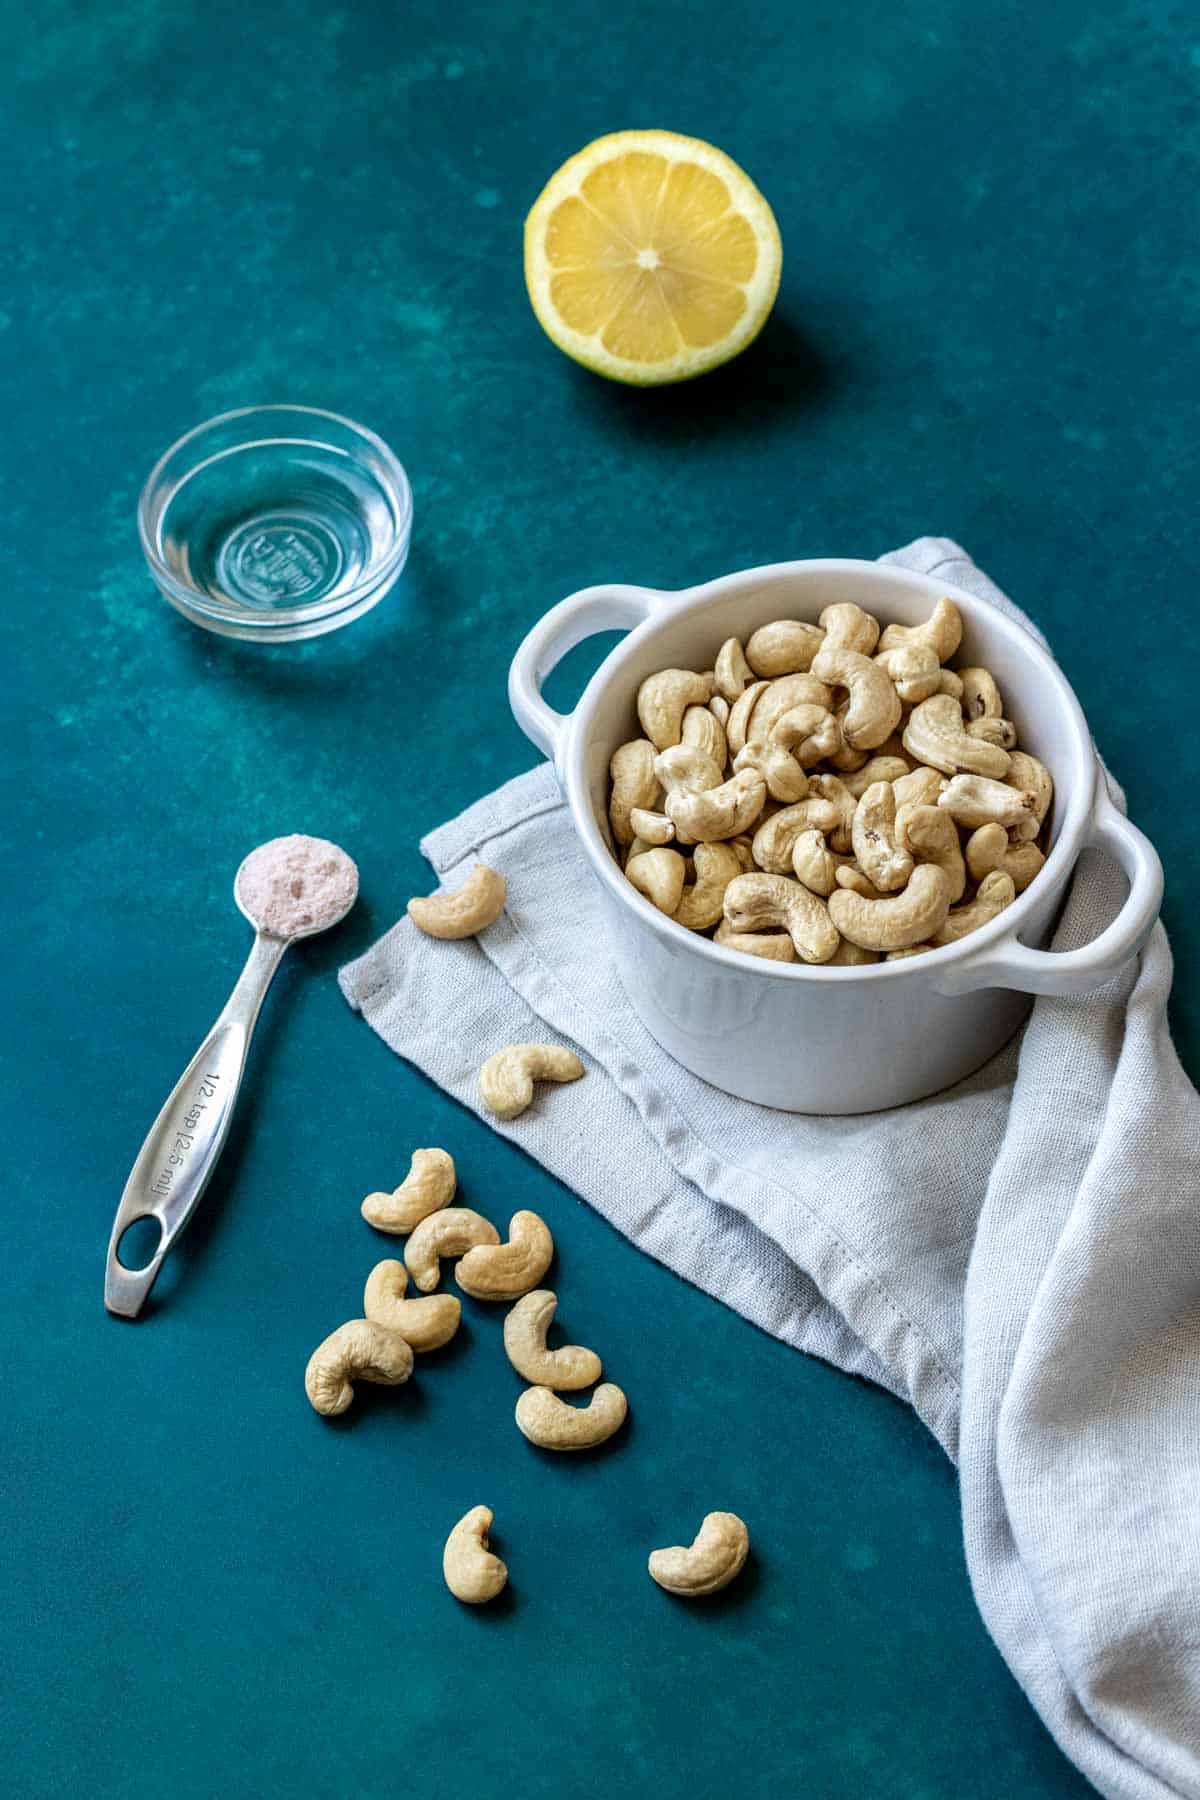 A dark turquoise backdrop with a bowl of cashews, half a lemon, a spoon of salt and a small bowl with lemon juice.